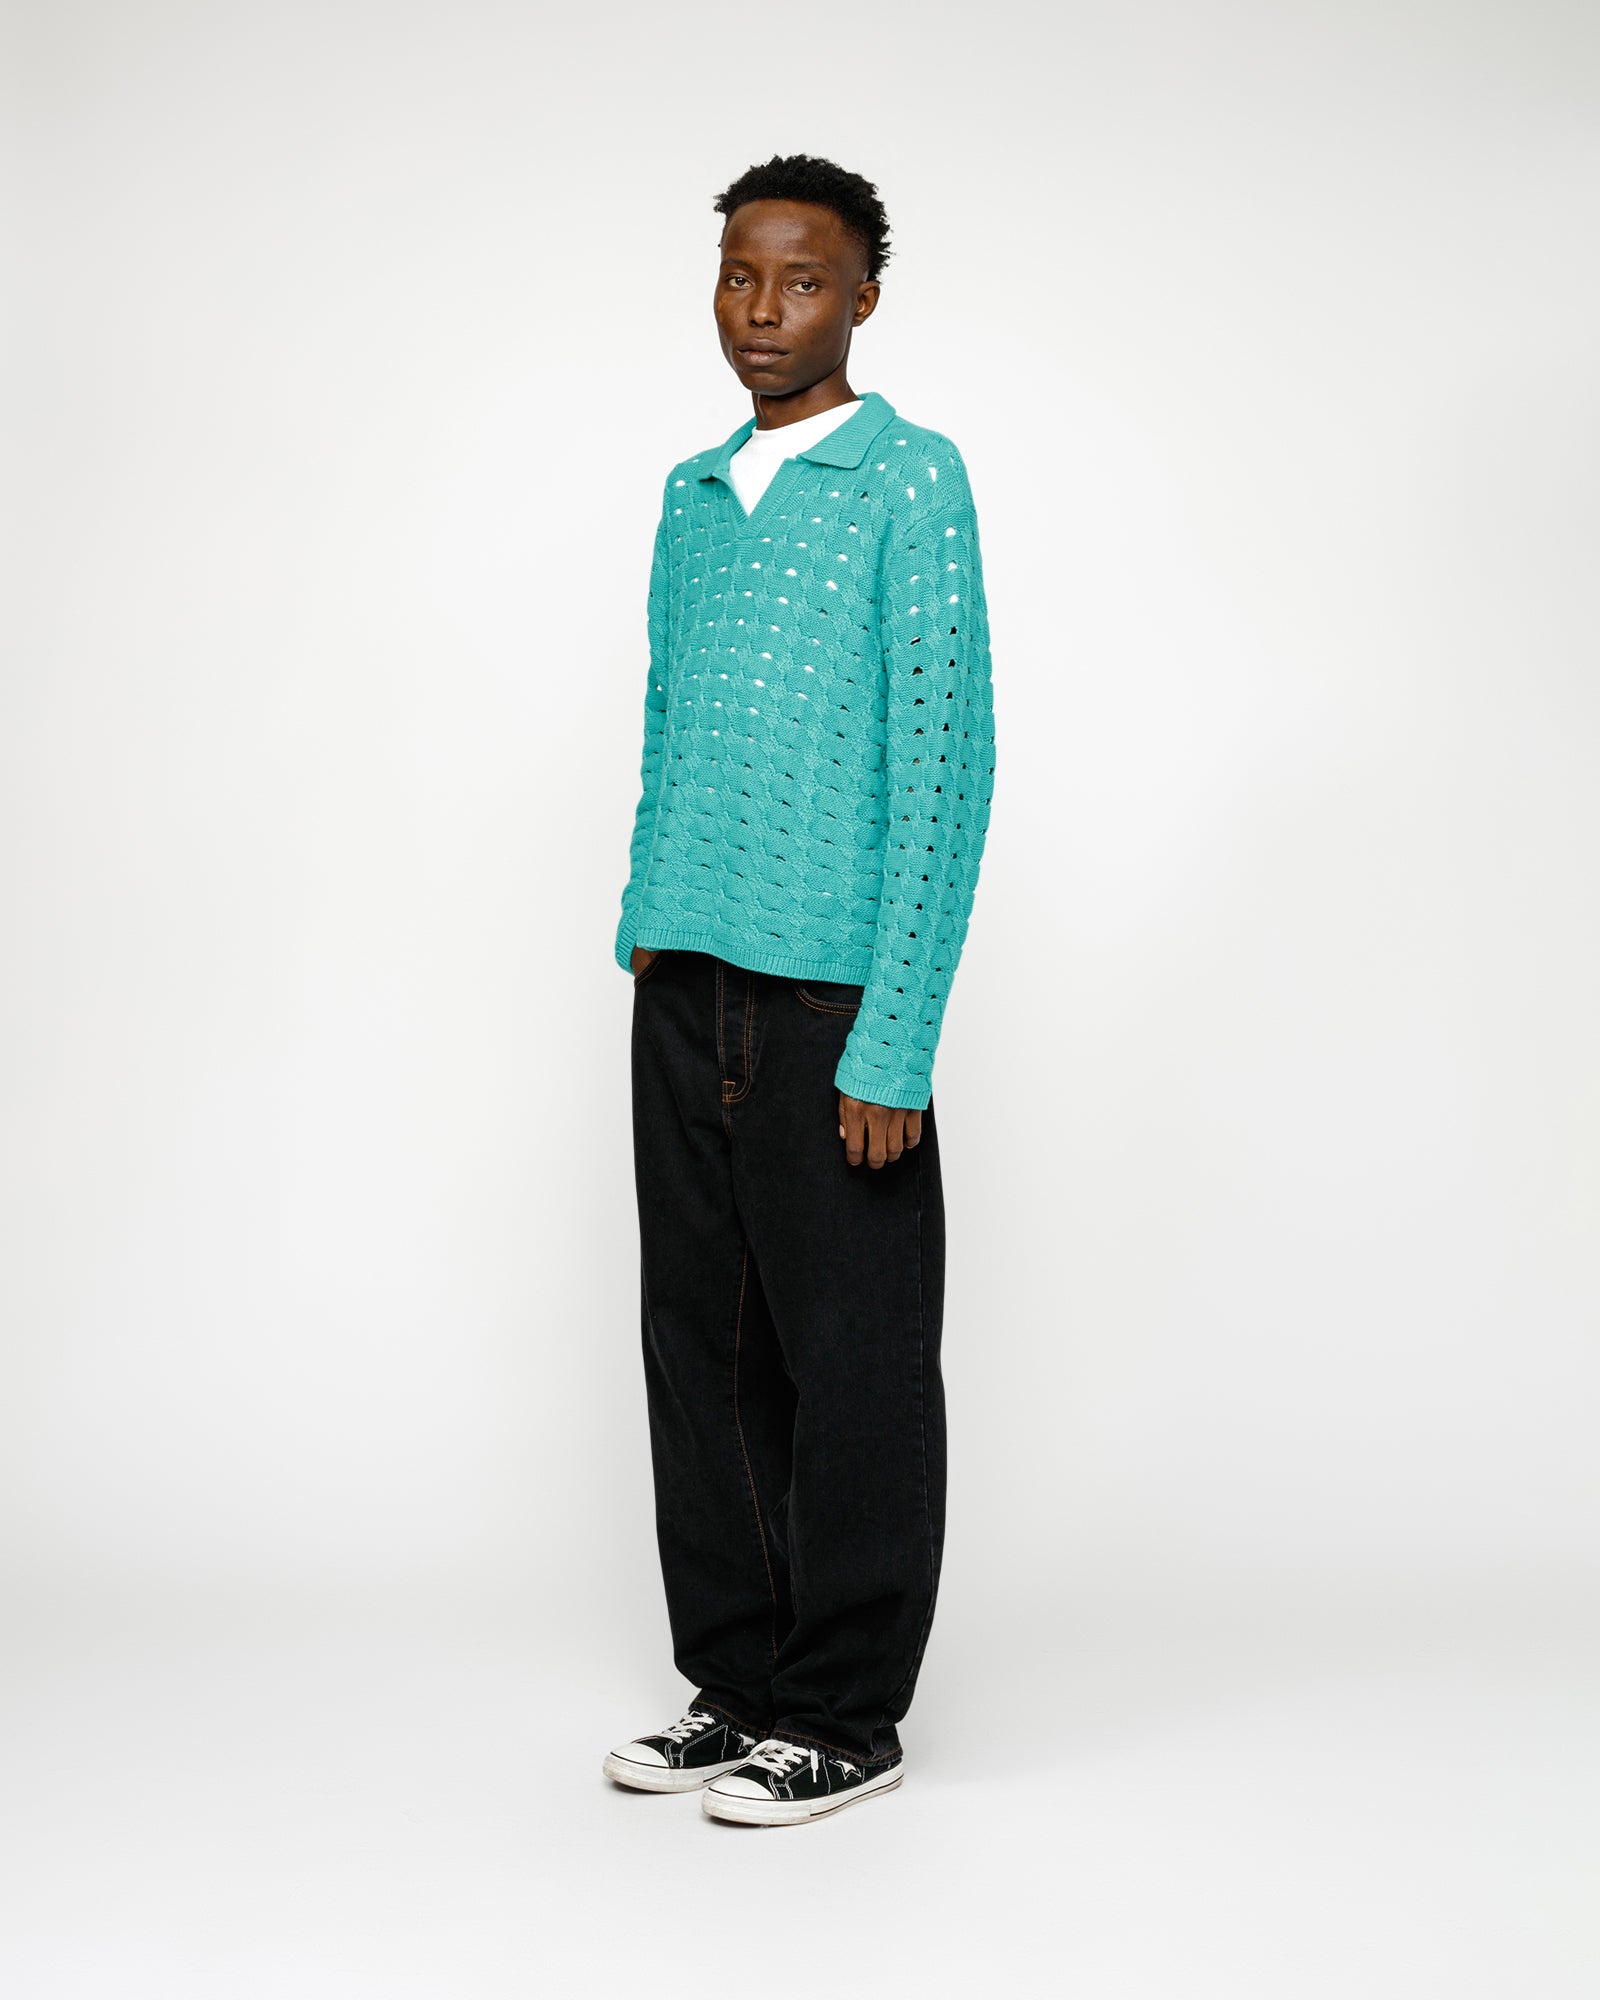 Stüssy Open Knit Collared Sweater Teal Knits